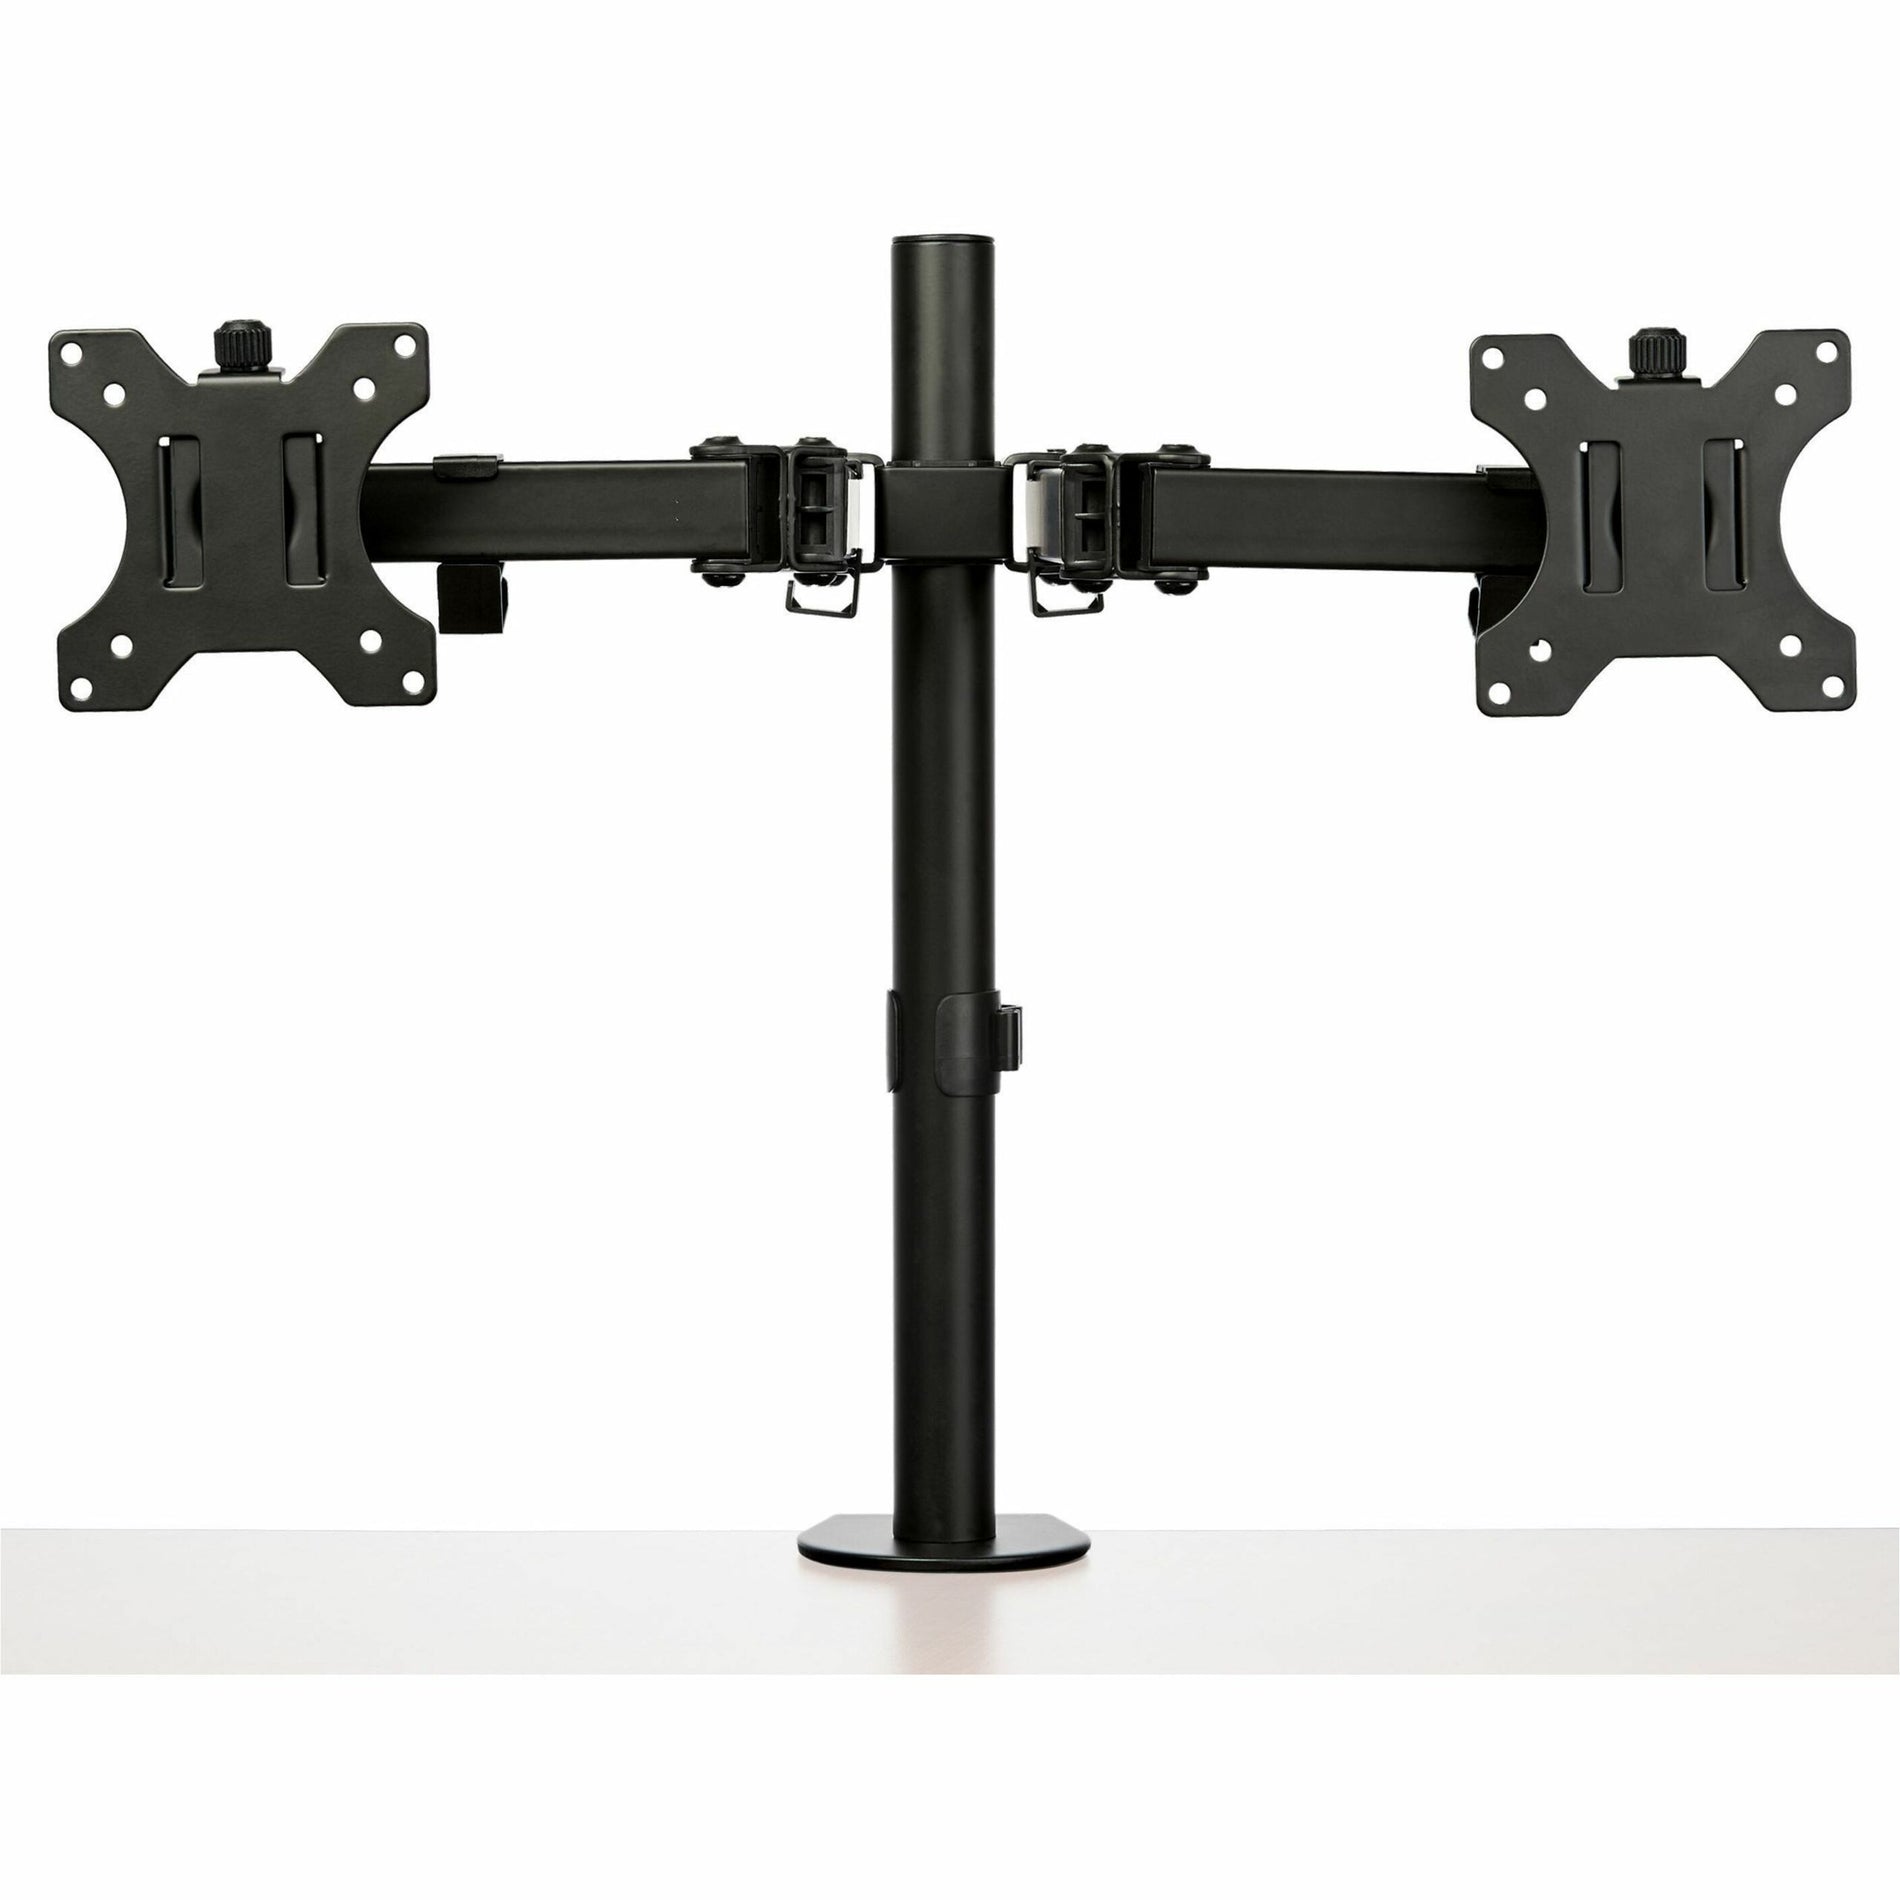 StarTech.com ARMDUAL2 Desk Mount Dual Monitor Arm - Crossbar - Articulating - Steel, Holds 2 Monitors up to 32", 35.27 lb Capacity